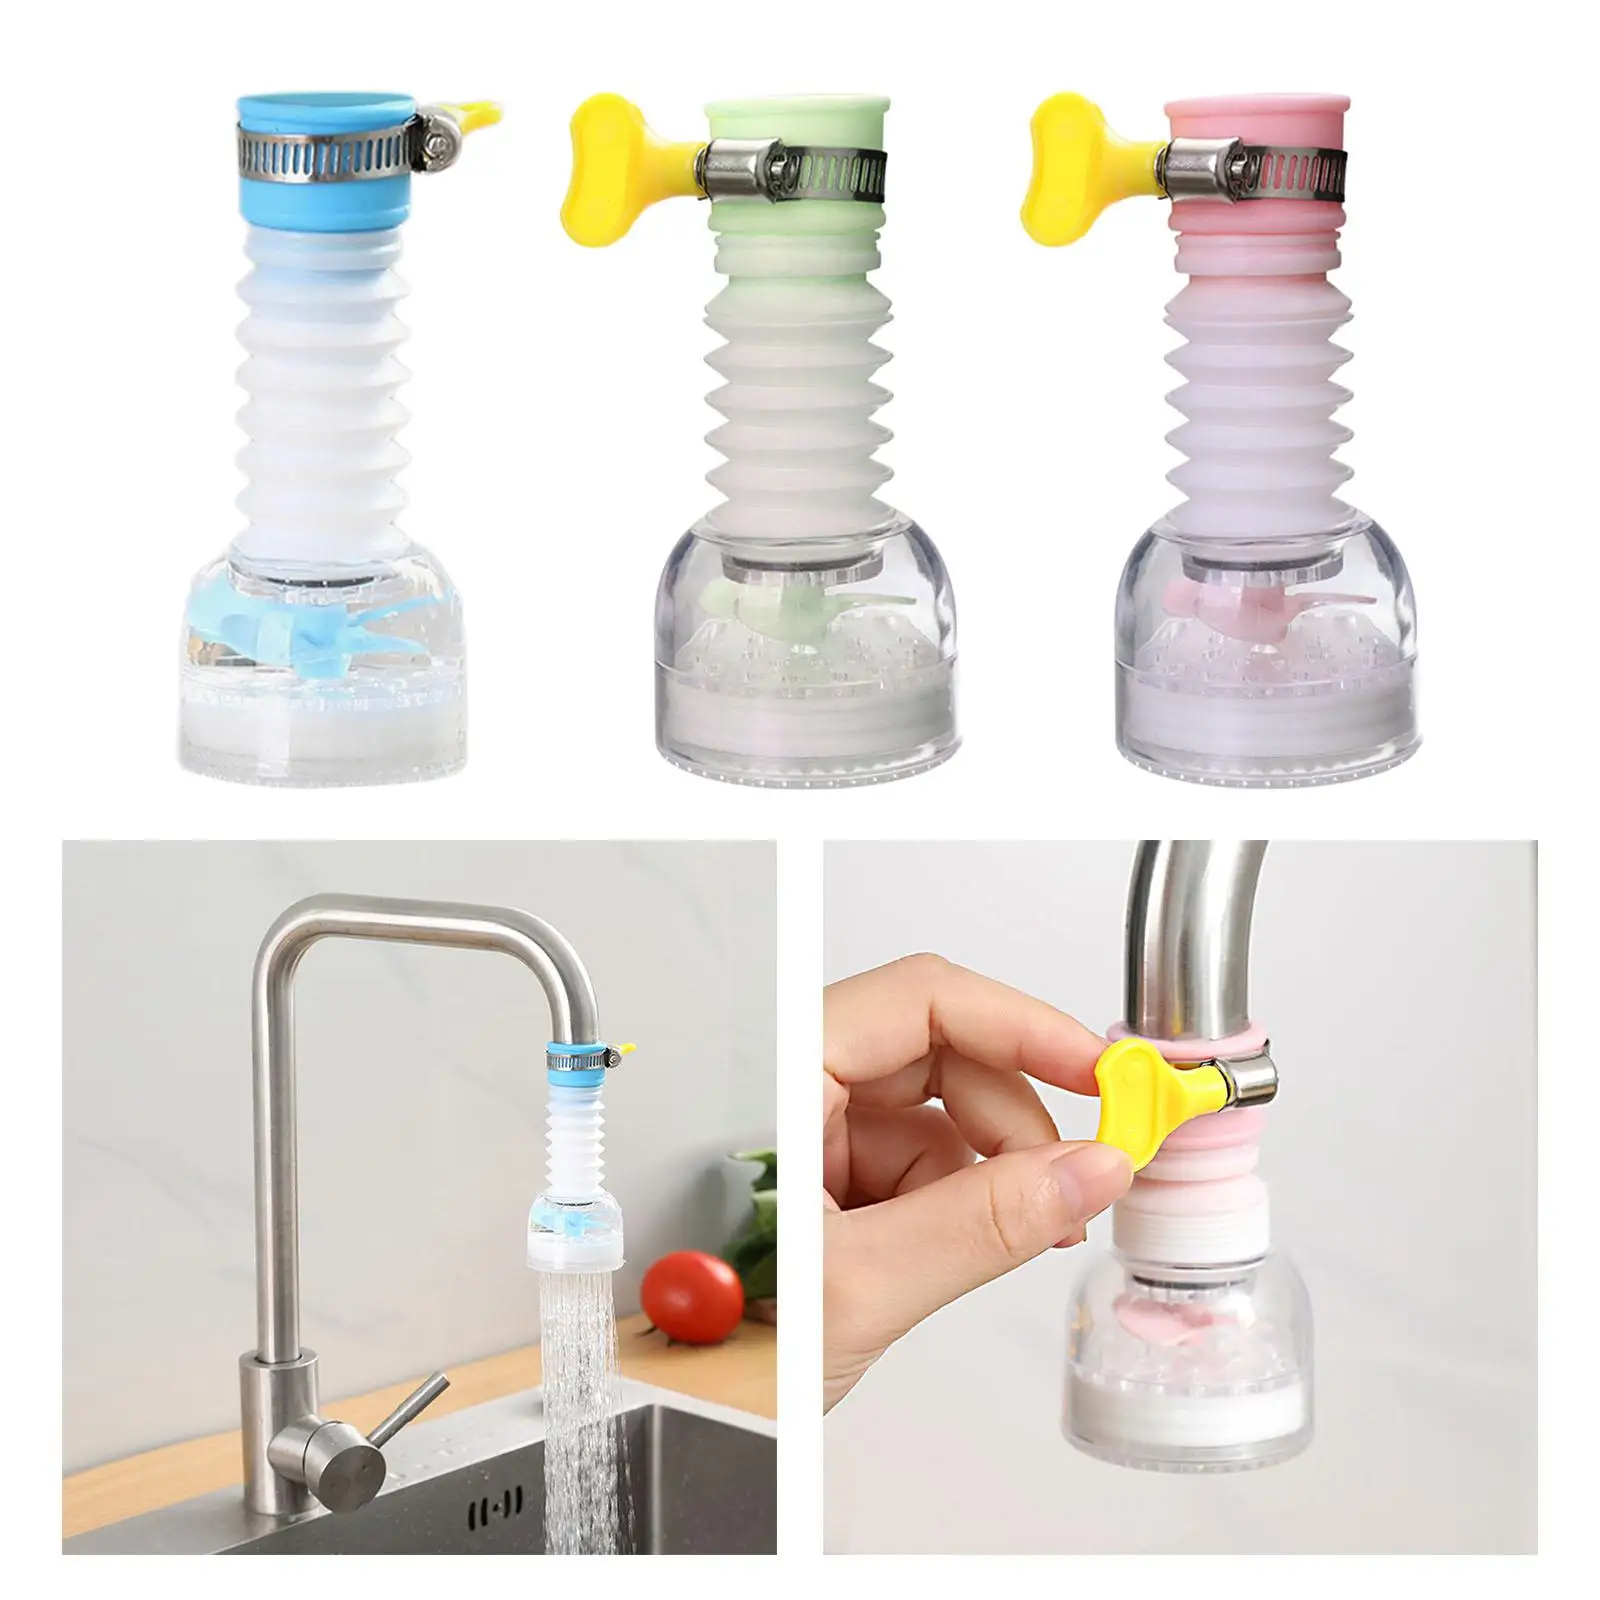 Faucet Splash Filter Sprayer Tap Attachment 360 Rotating Easy Install Water Saver Universal Faucet Booster Nozzle for Kitchen